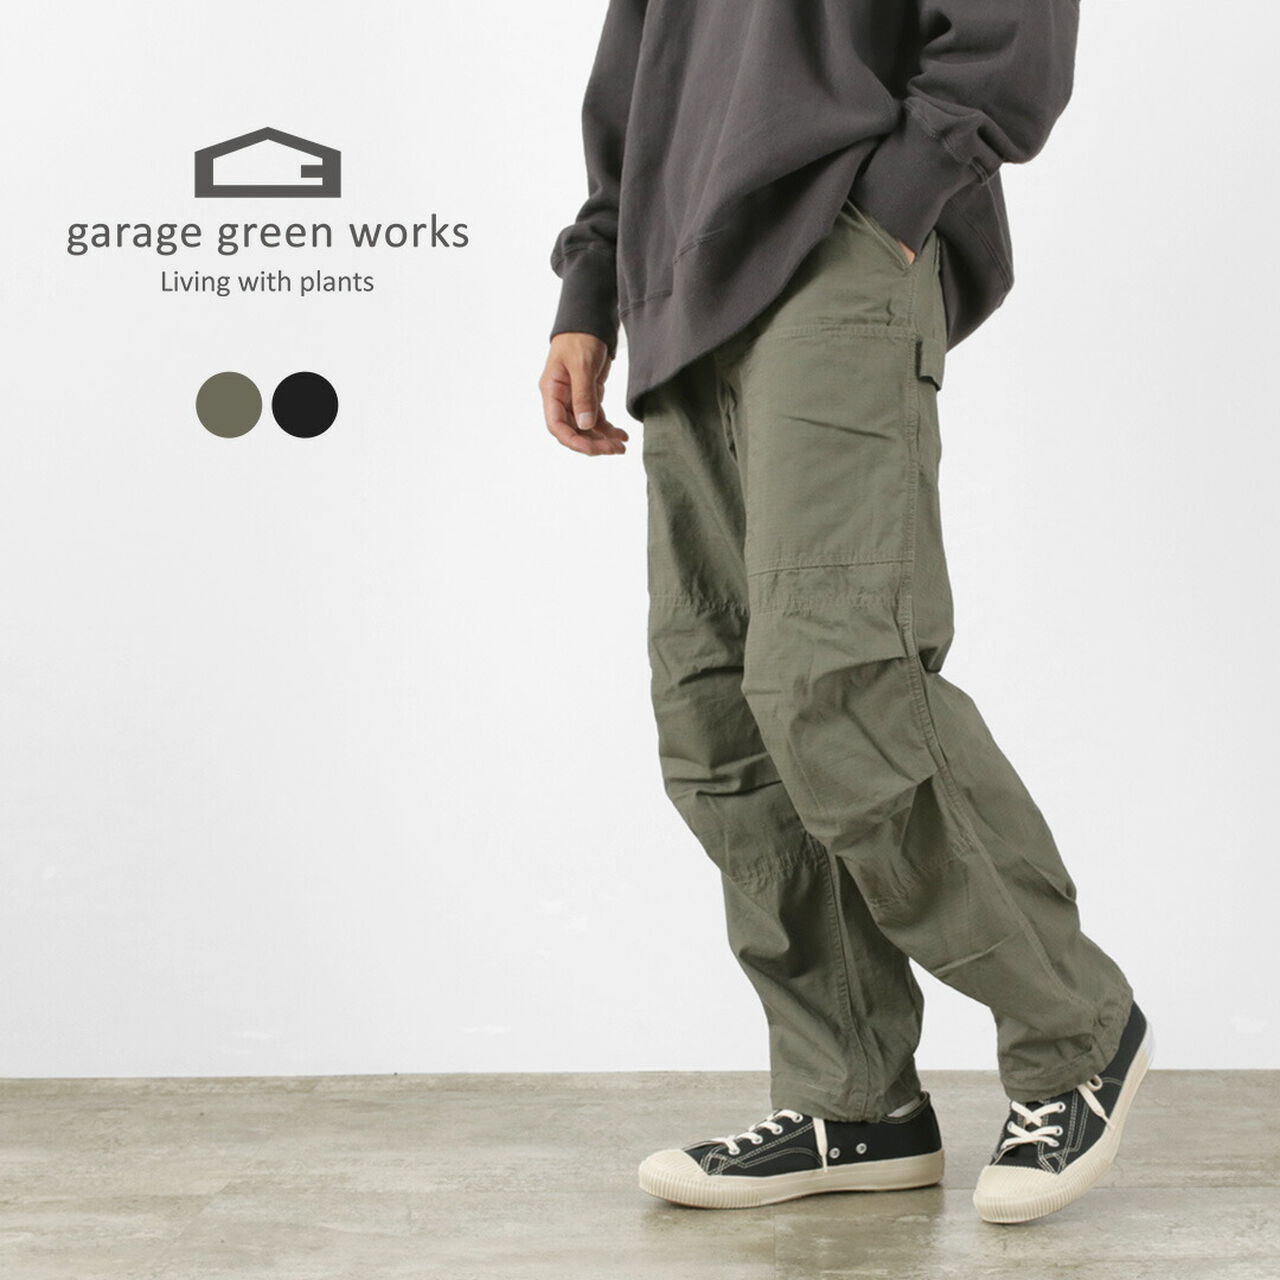 Comfortable and durable gardening trousers for men and women